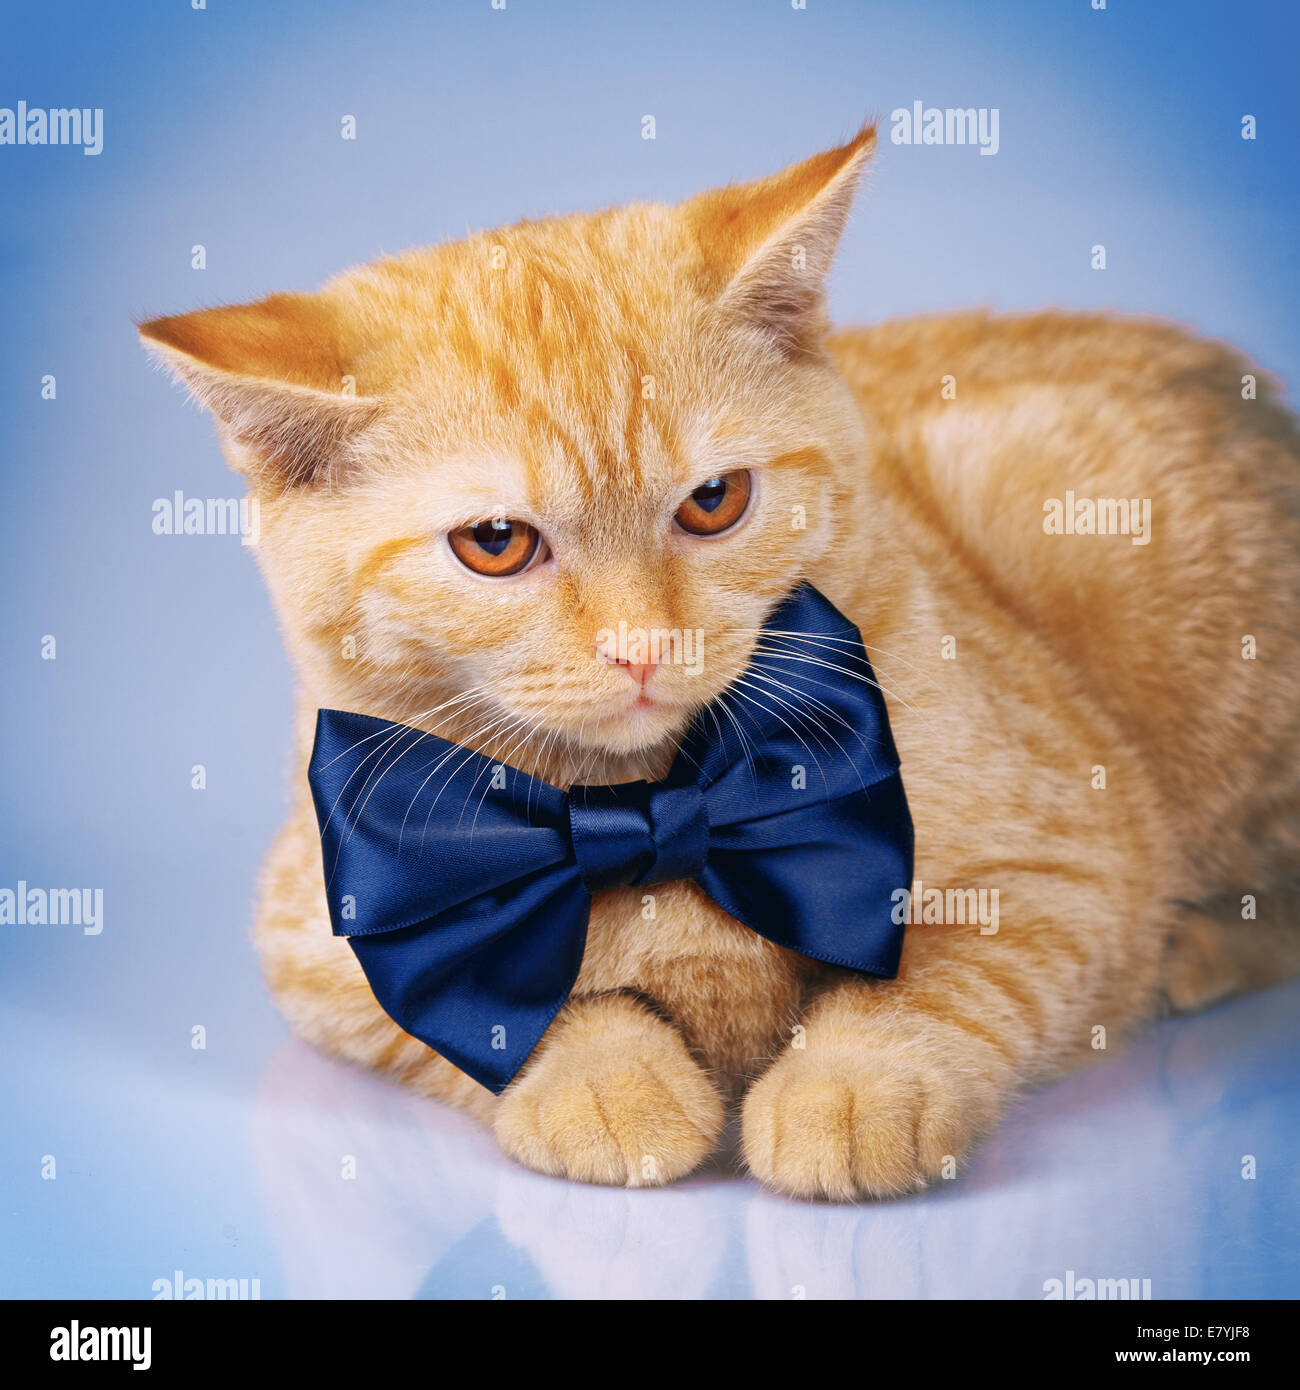 Cute Cat Wearing Coat and Red Bowtie Graphic by vatemplatecards